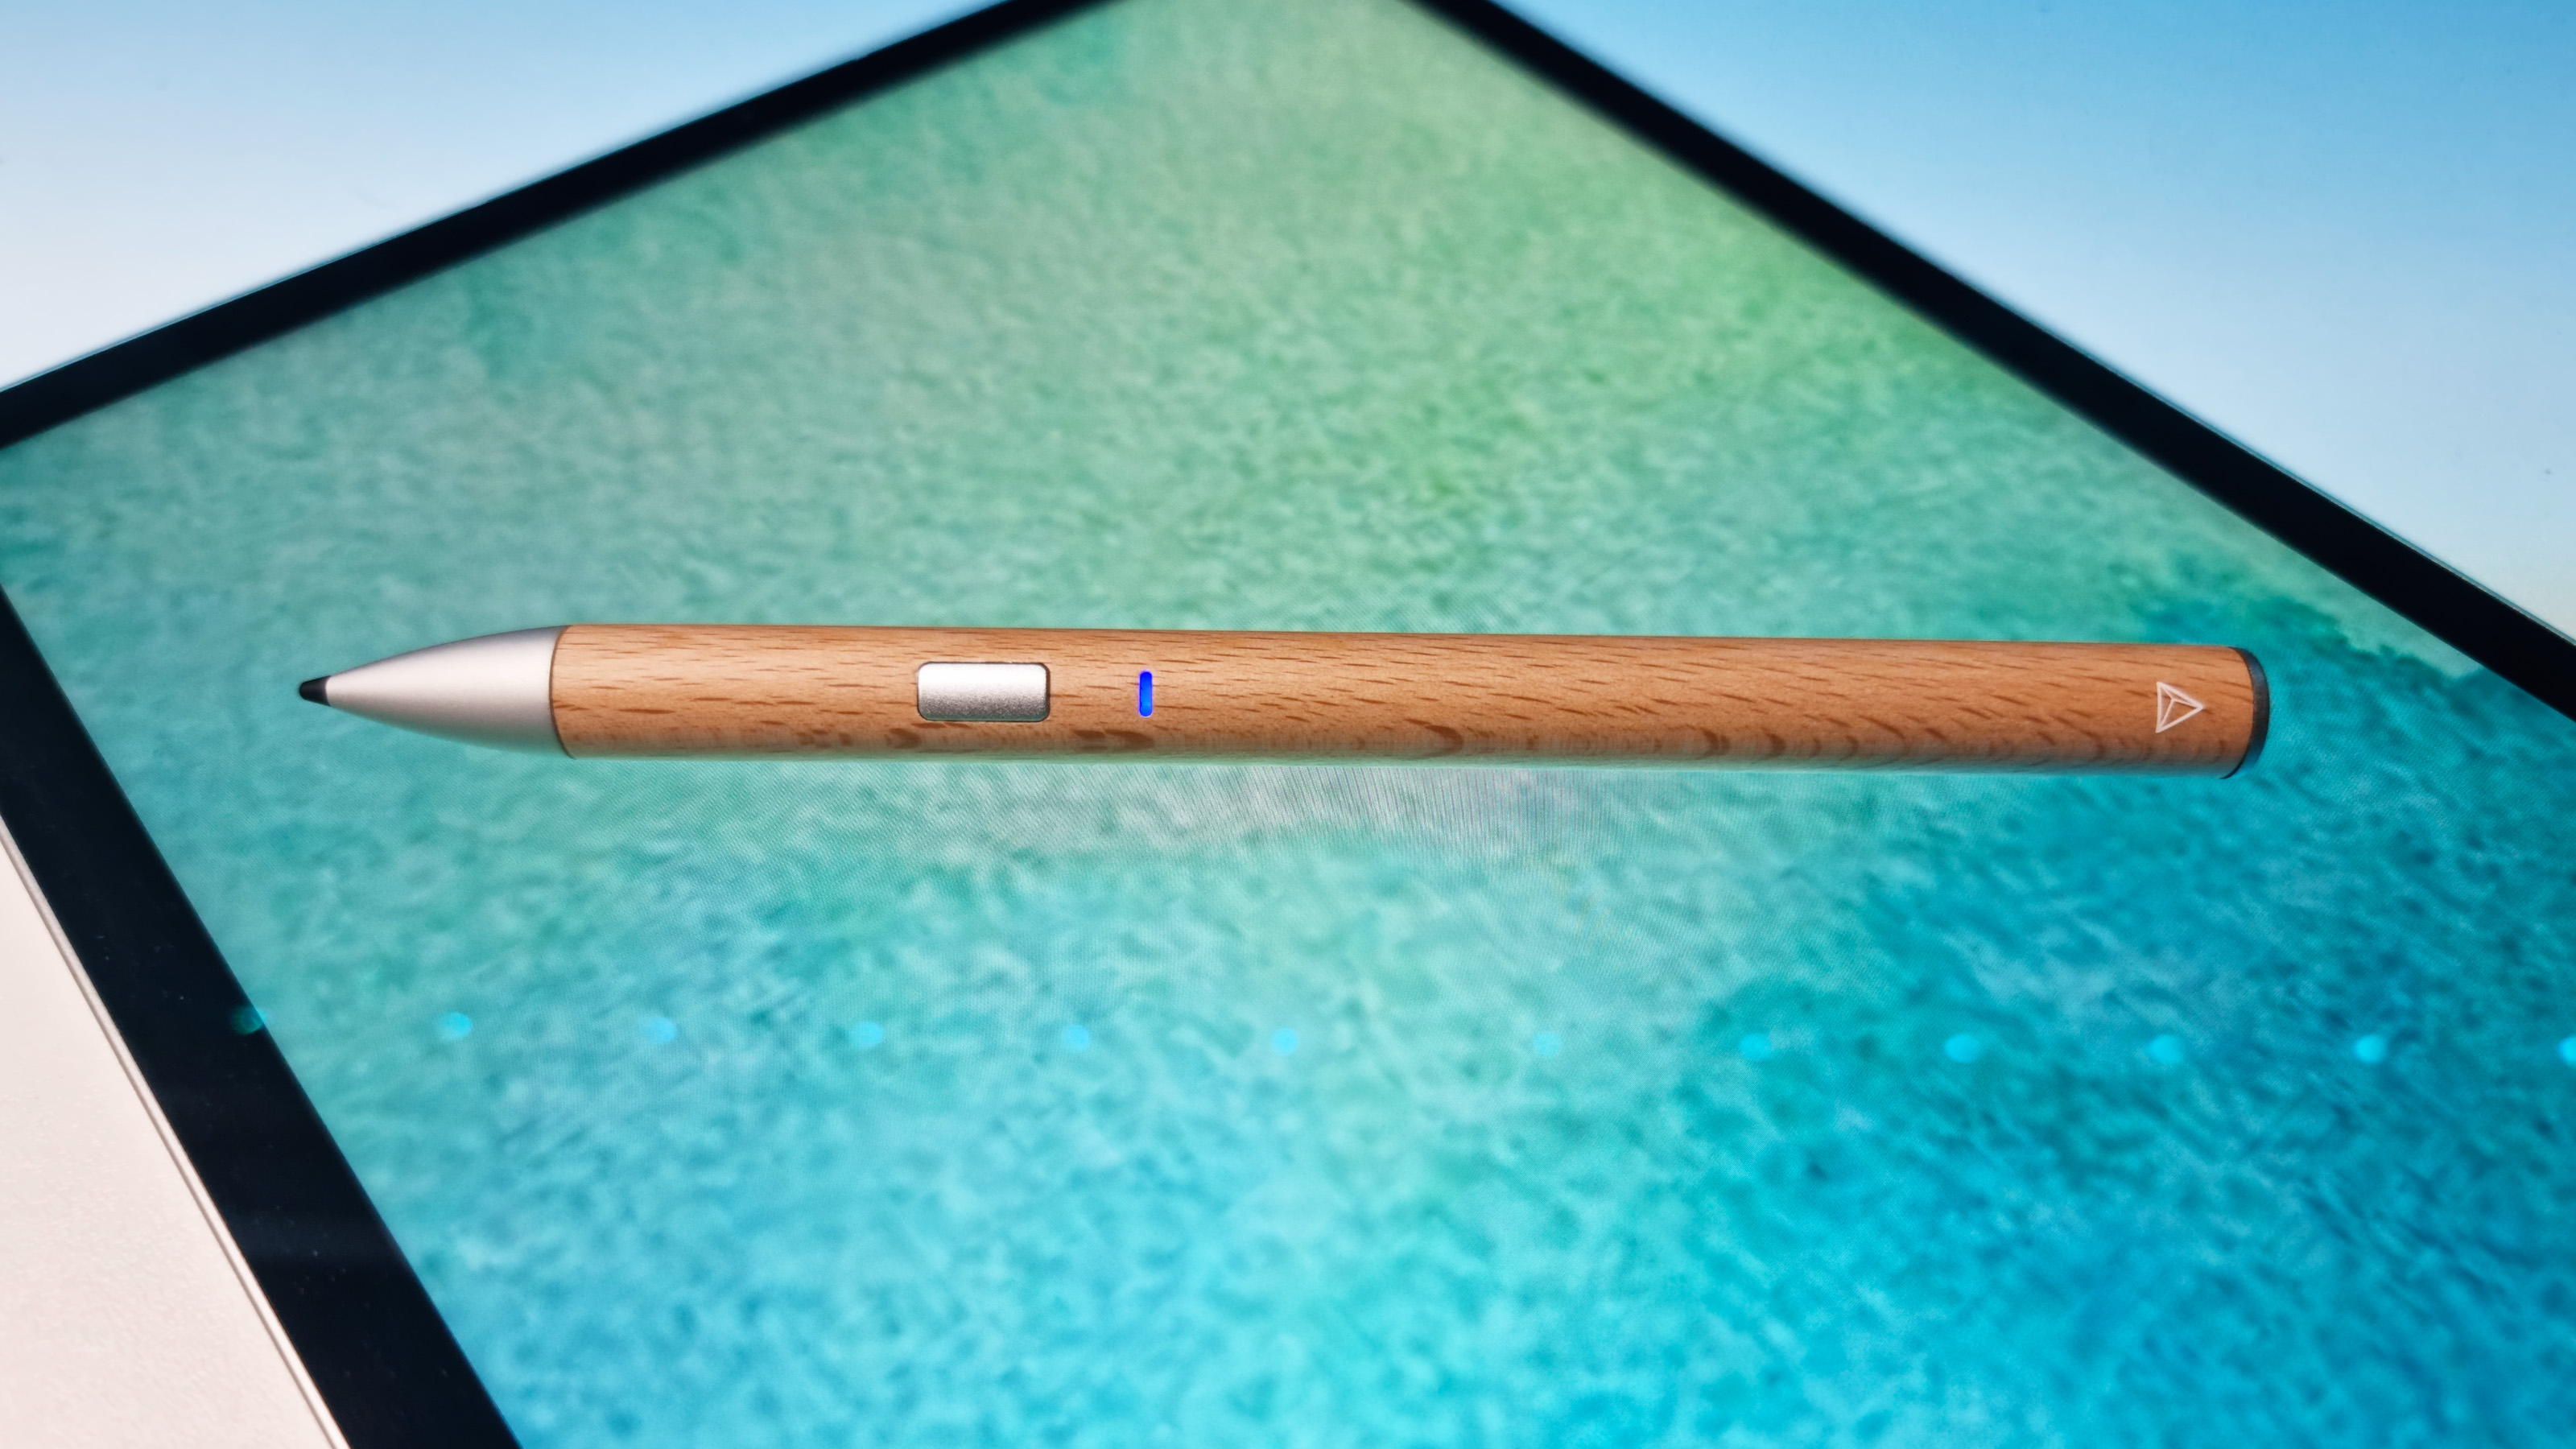 A shot of the Adonit Log Stylus on a colorful background